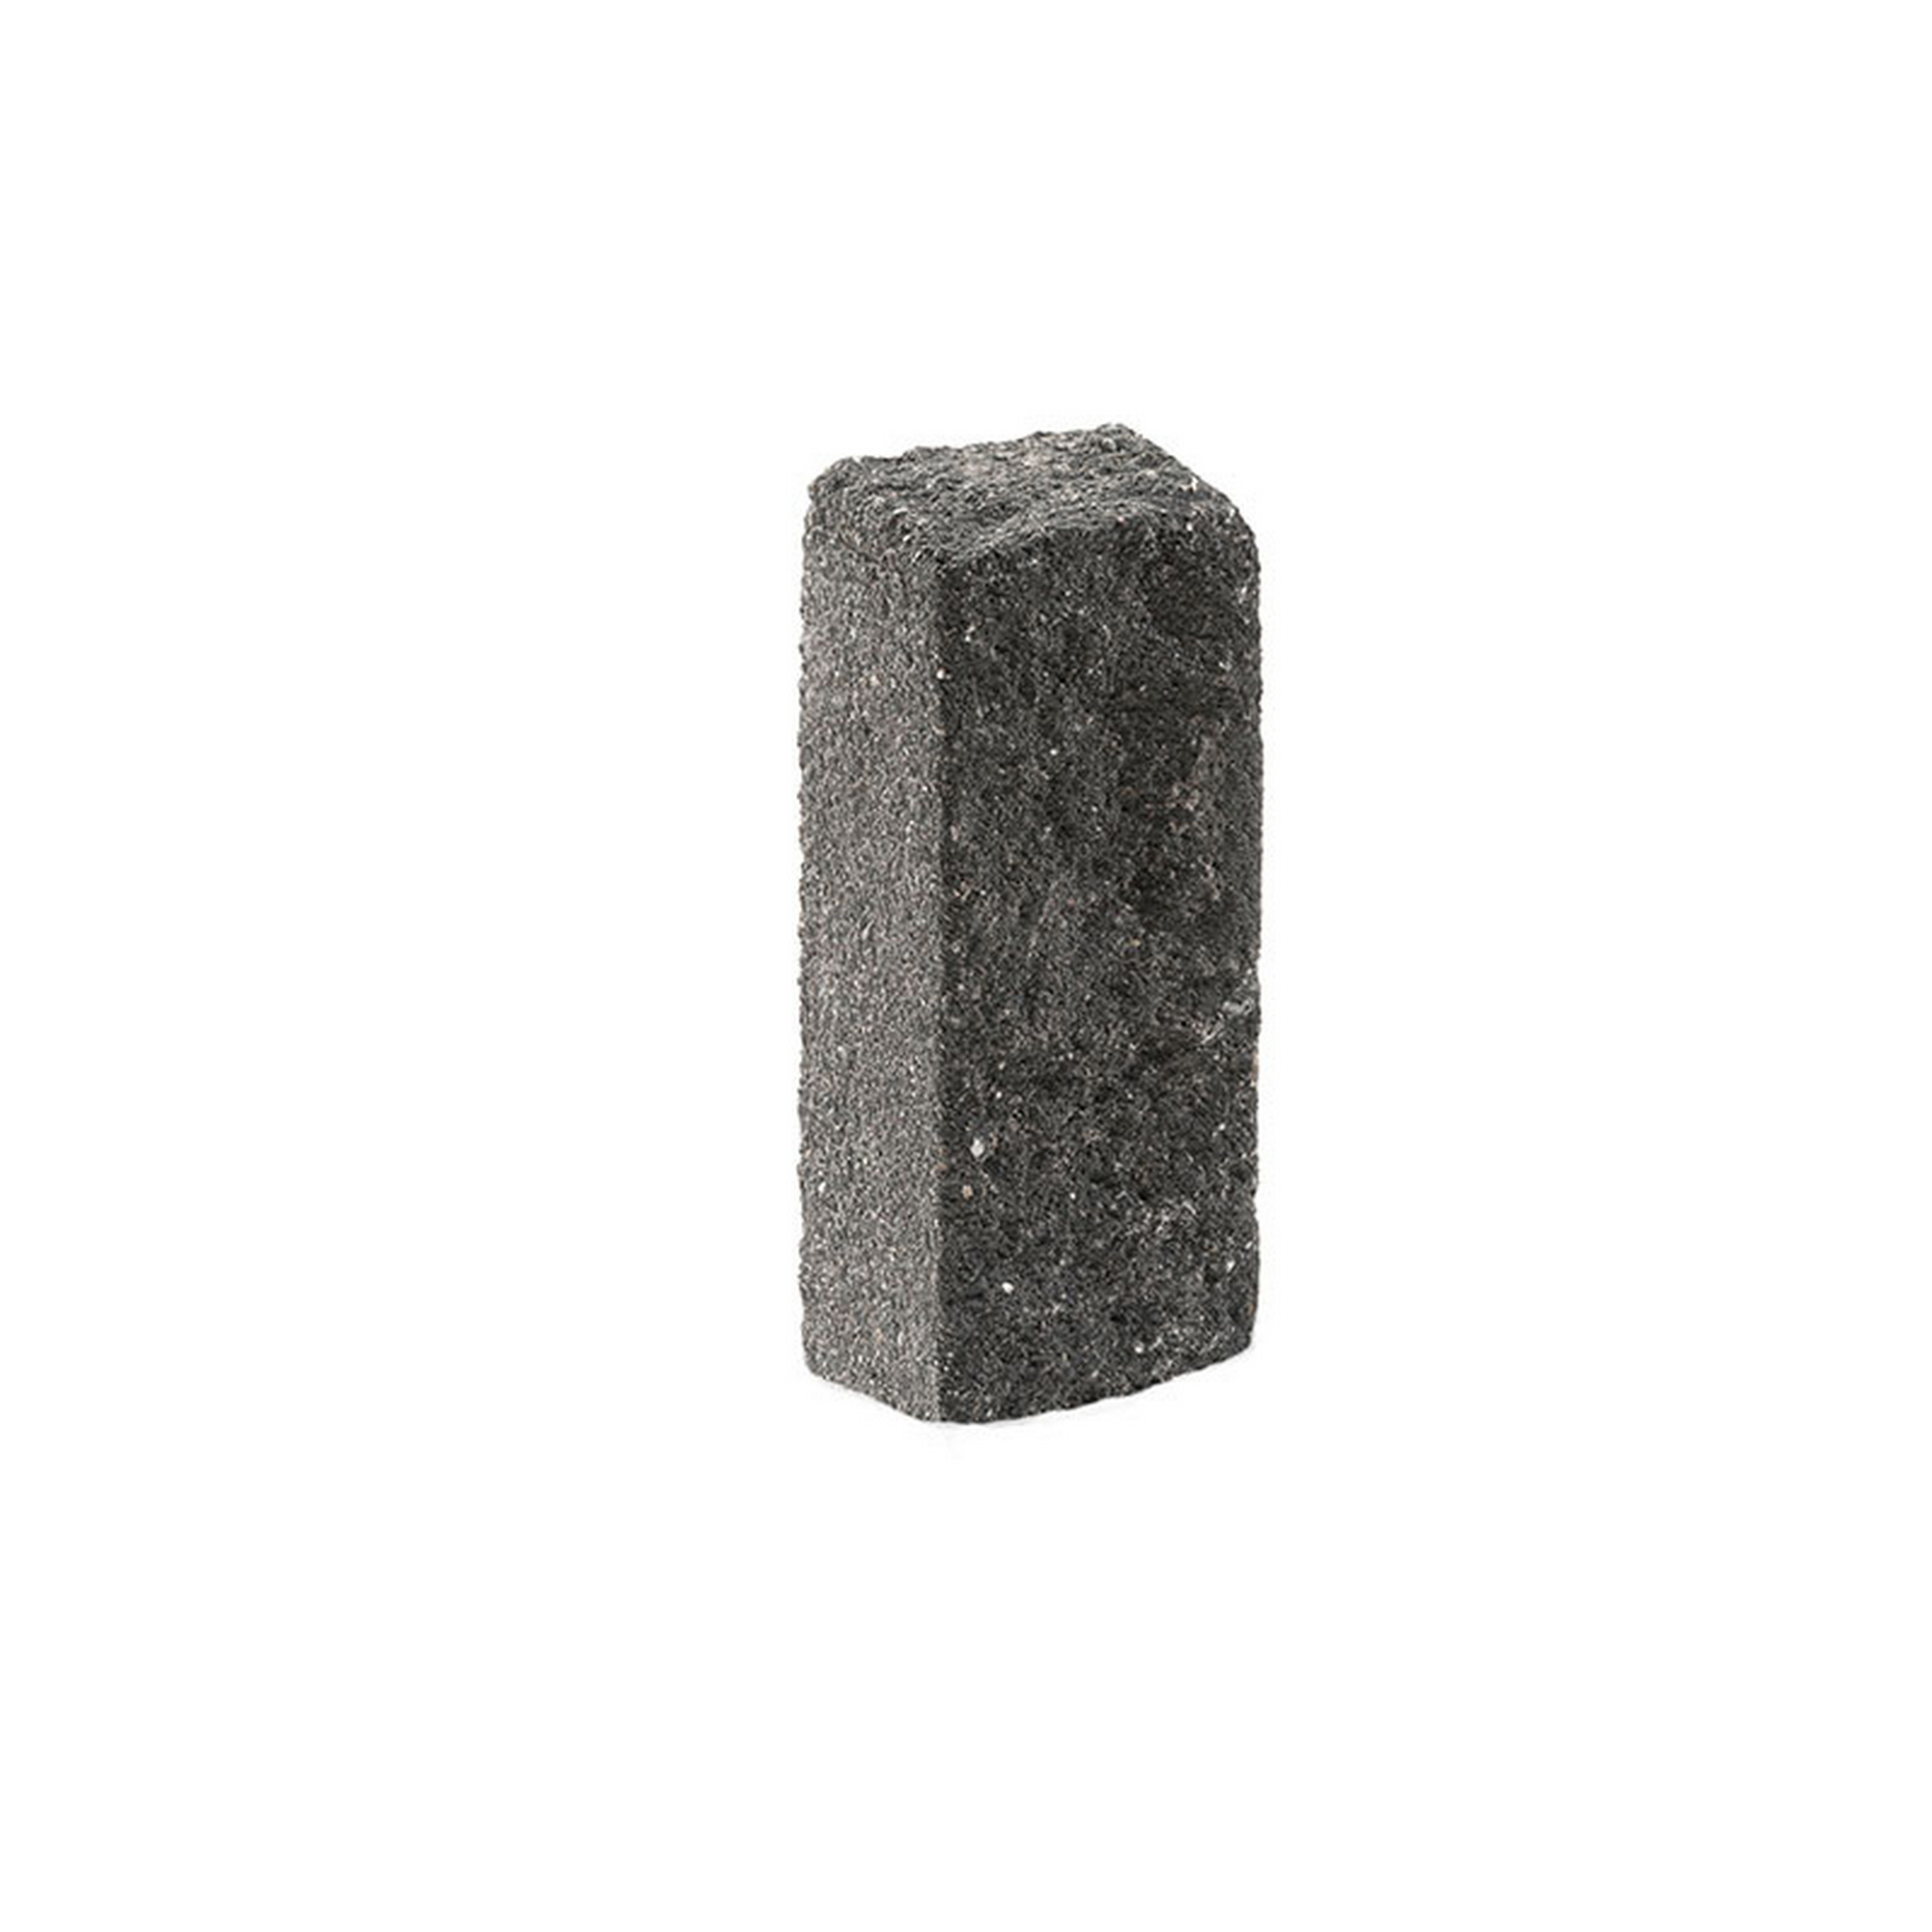 Mauerstein 'T-Wall Pico' Beton 30 x 10 x 10 cm + product picture